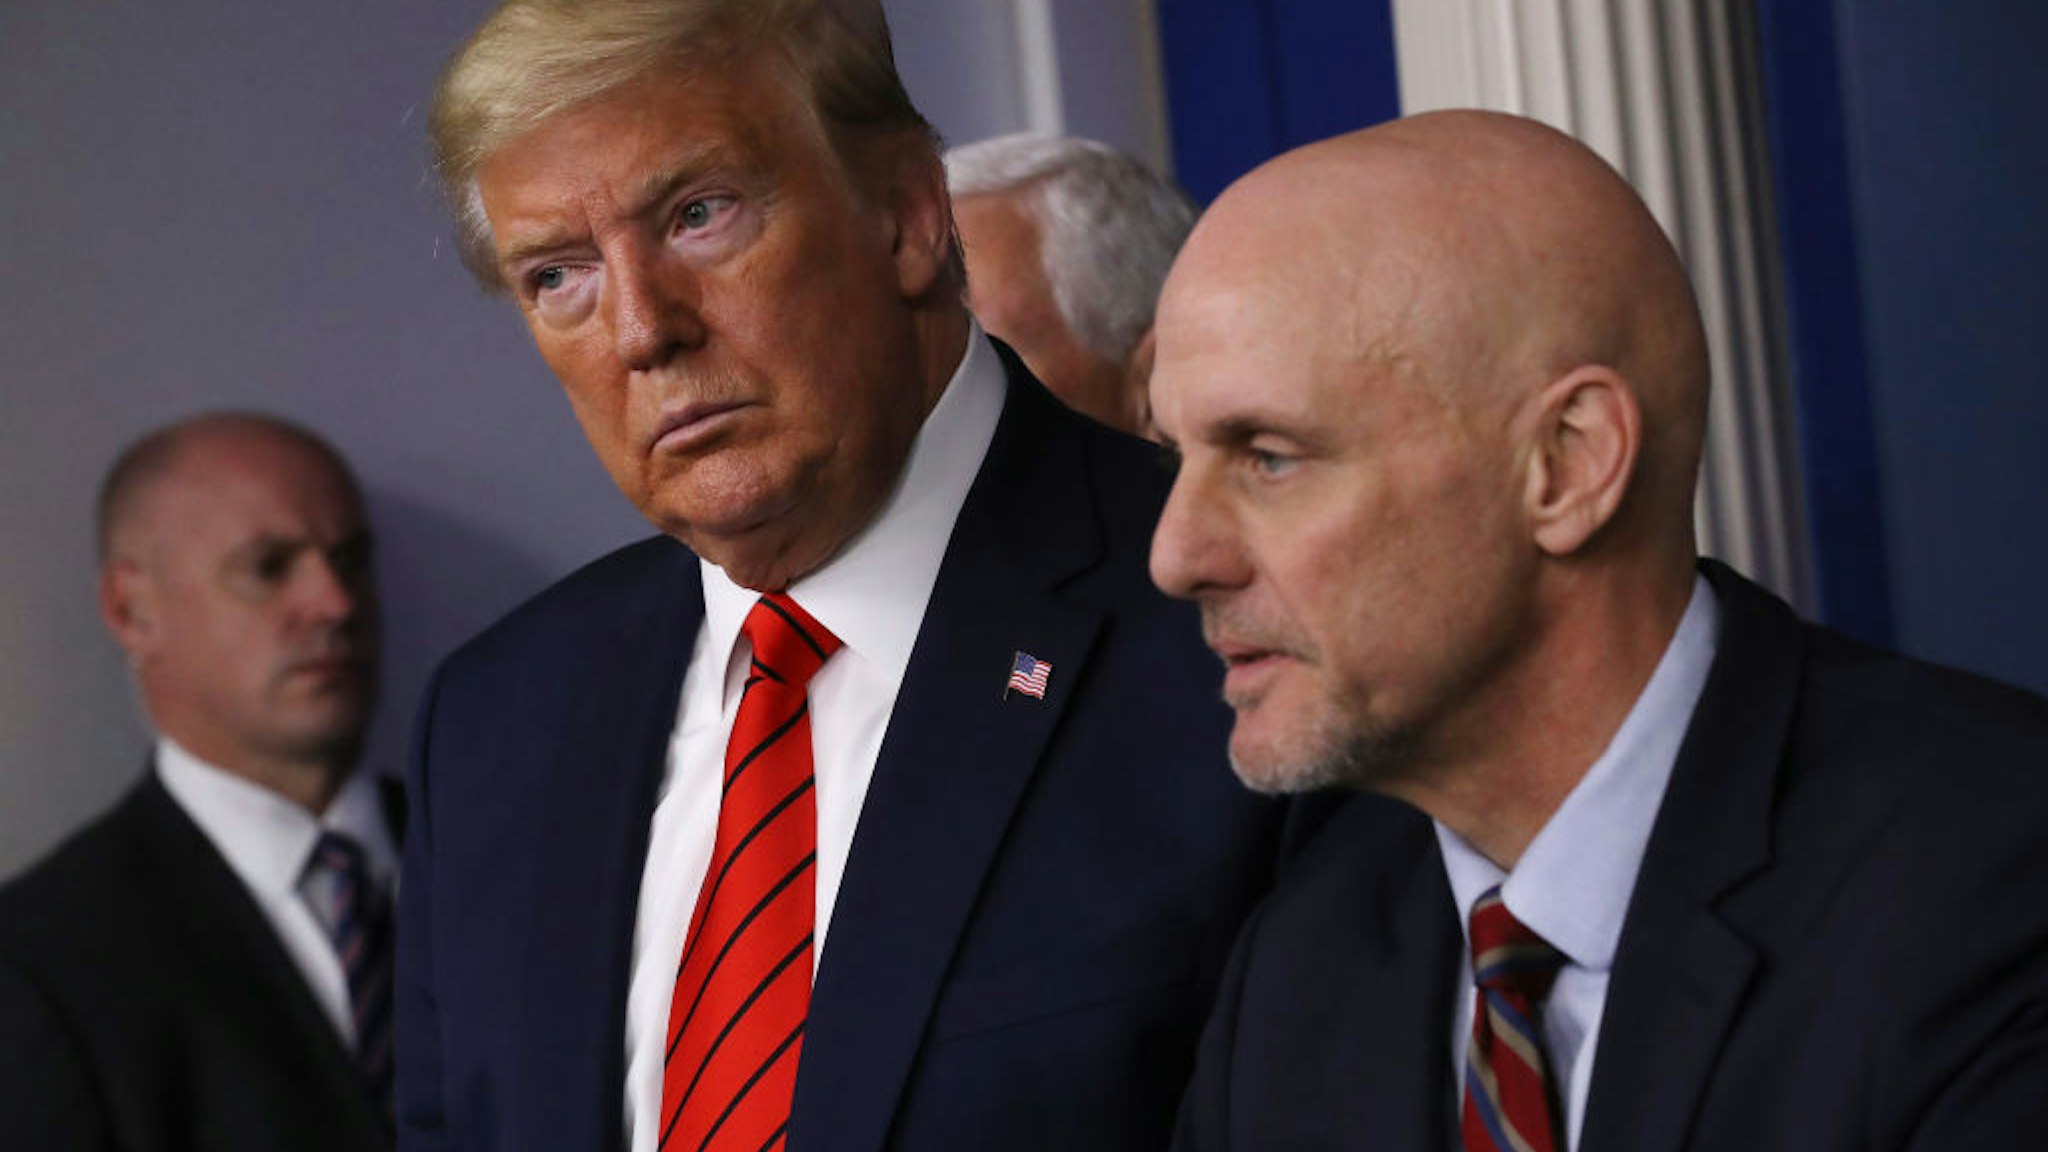 U.S. President Donald Trump listens to FDA Commissioner Stephen Hahn during a news conference with members of the White House coronavirus task force in the Brady Press Briefing Room at the White House March 19, 2020 in Washington, DC.